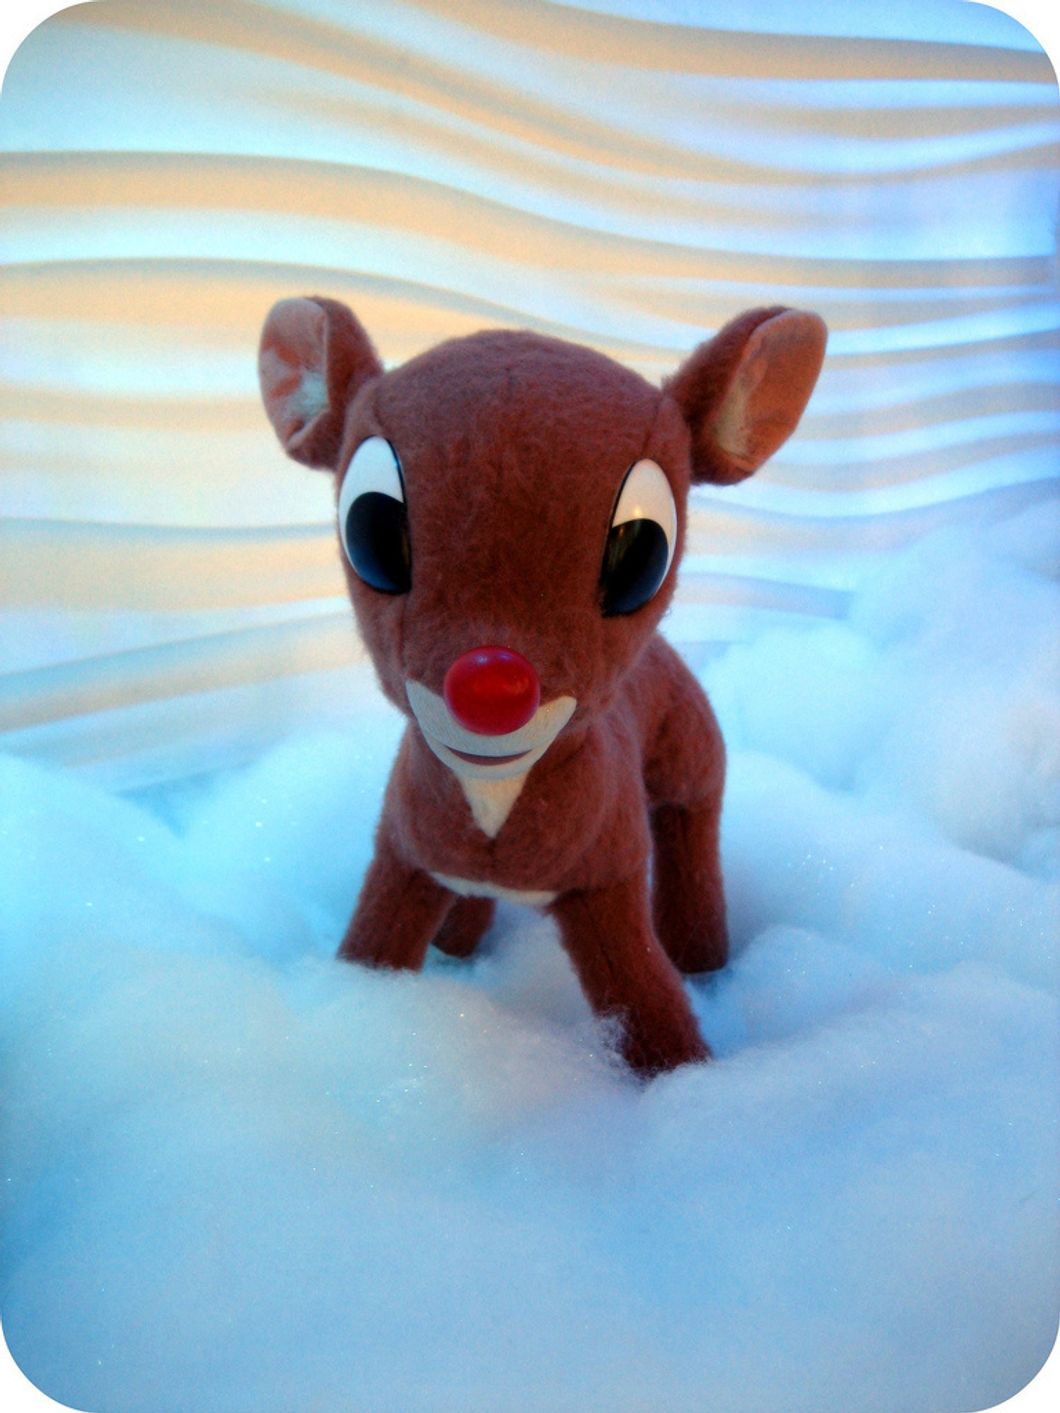 Rudolph The Problematic Reindeer?